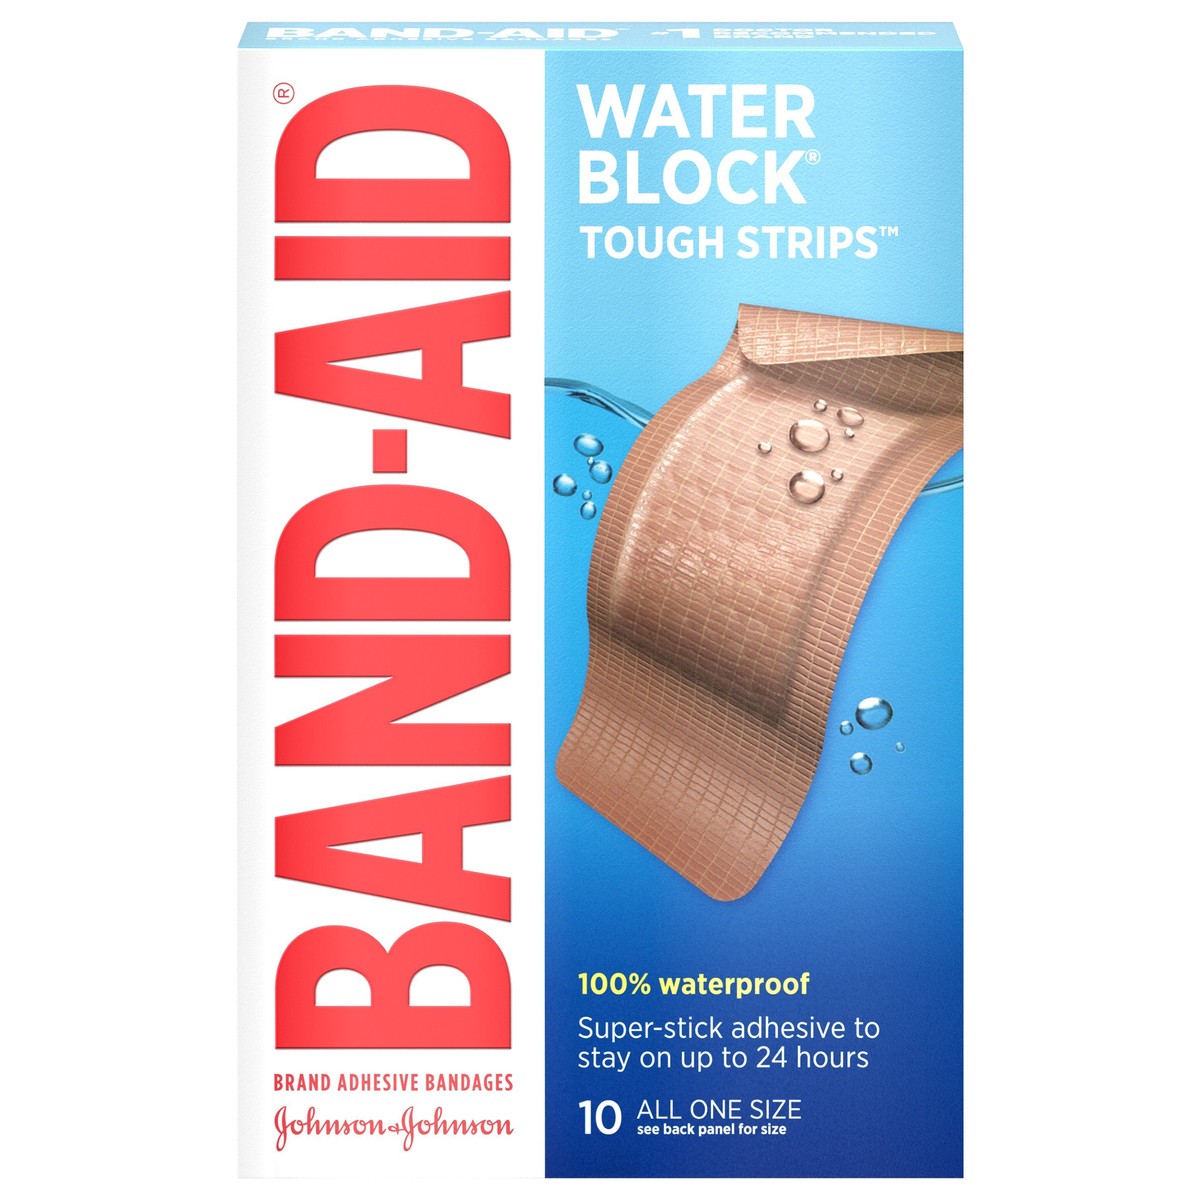 slide 1 of 8, BAND-AID Water Block Tough Strips Adhesive Bandages for First Aid Wound Care, Durable Waterproof Bandages to Protect Minor Cuts, Scrapes & Burns, Sterile, Extra Large, 10 ct